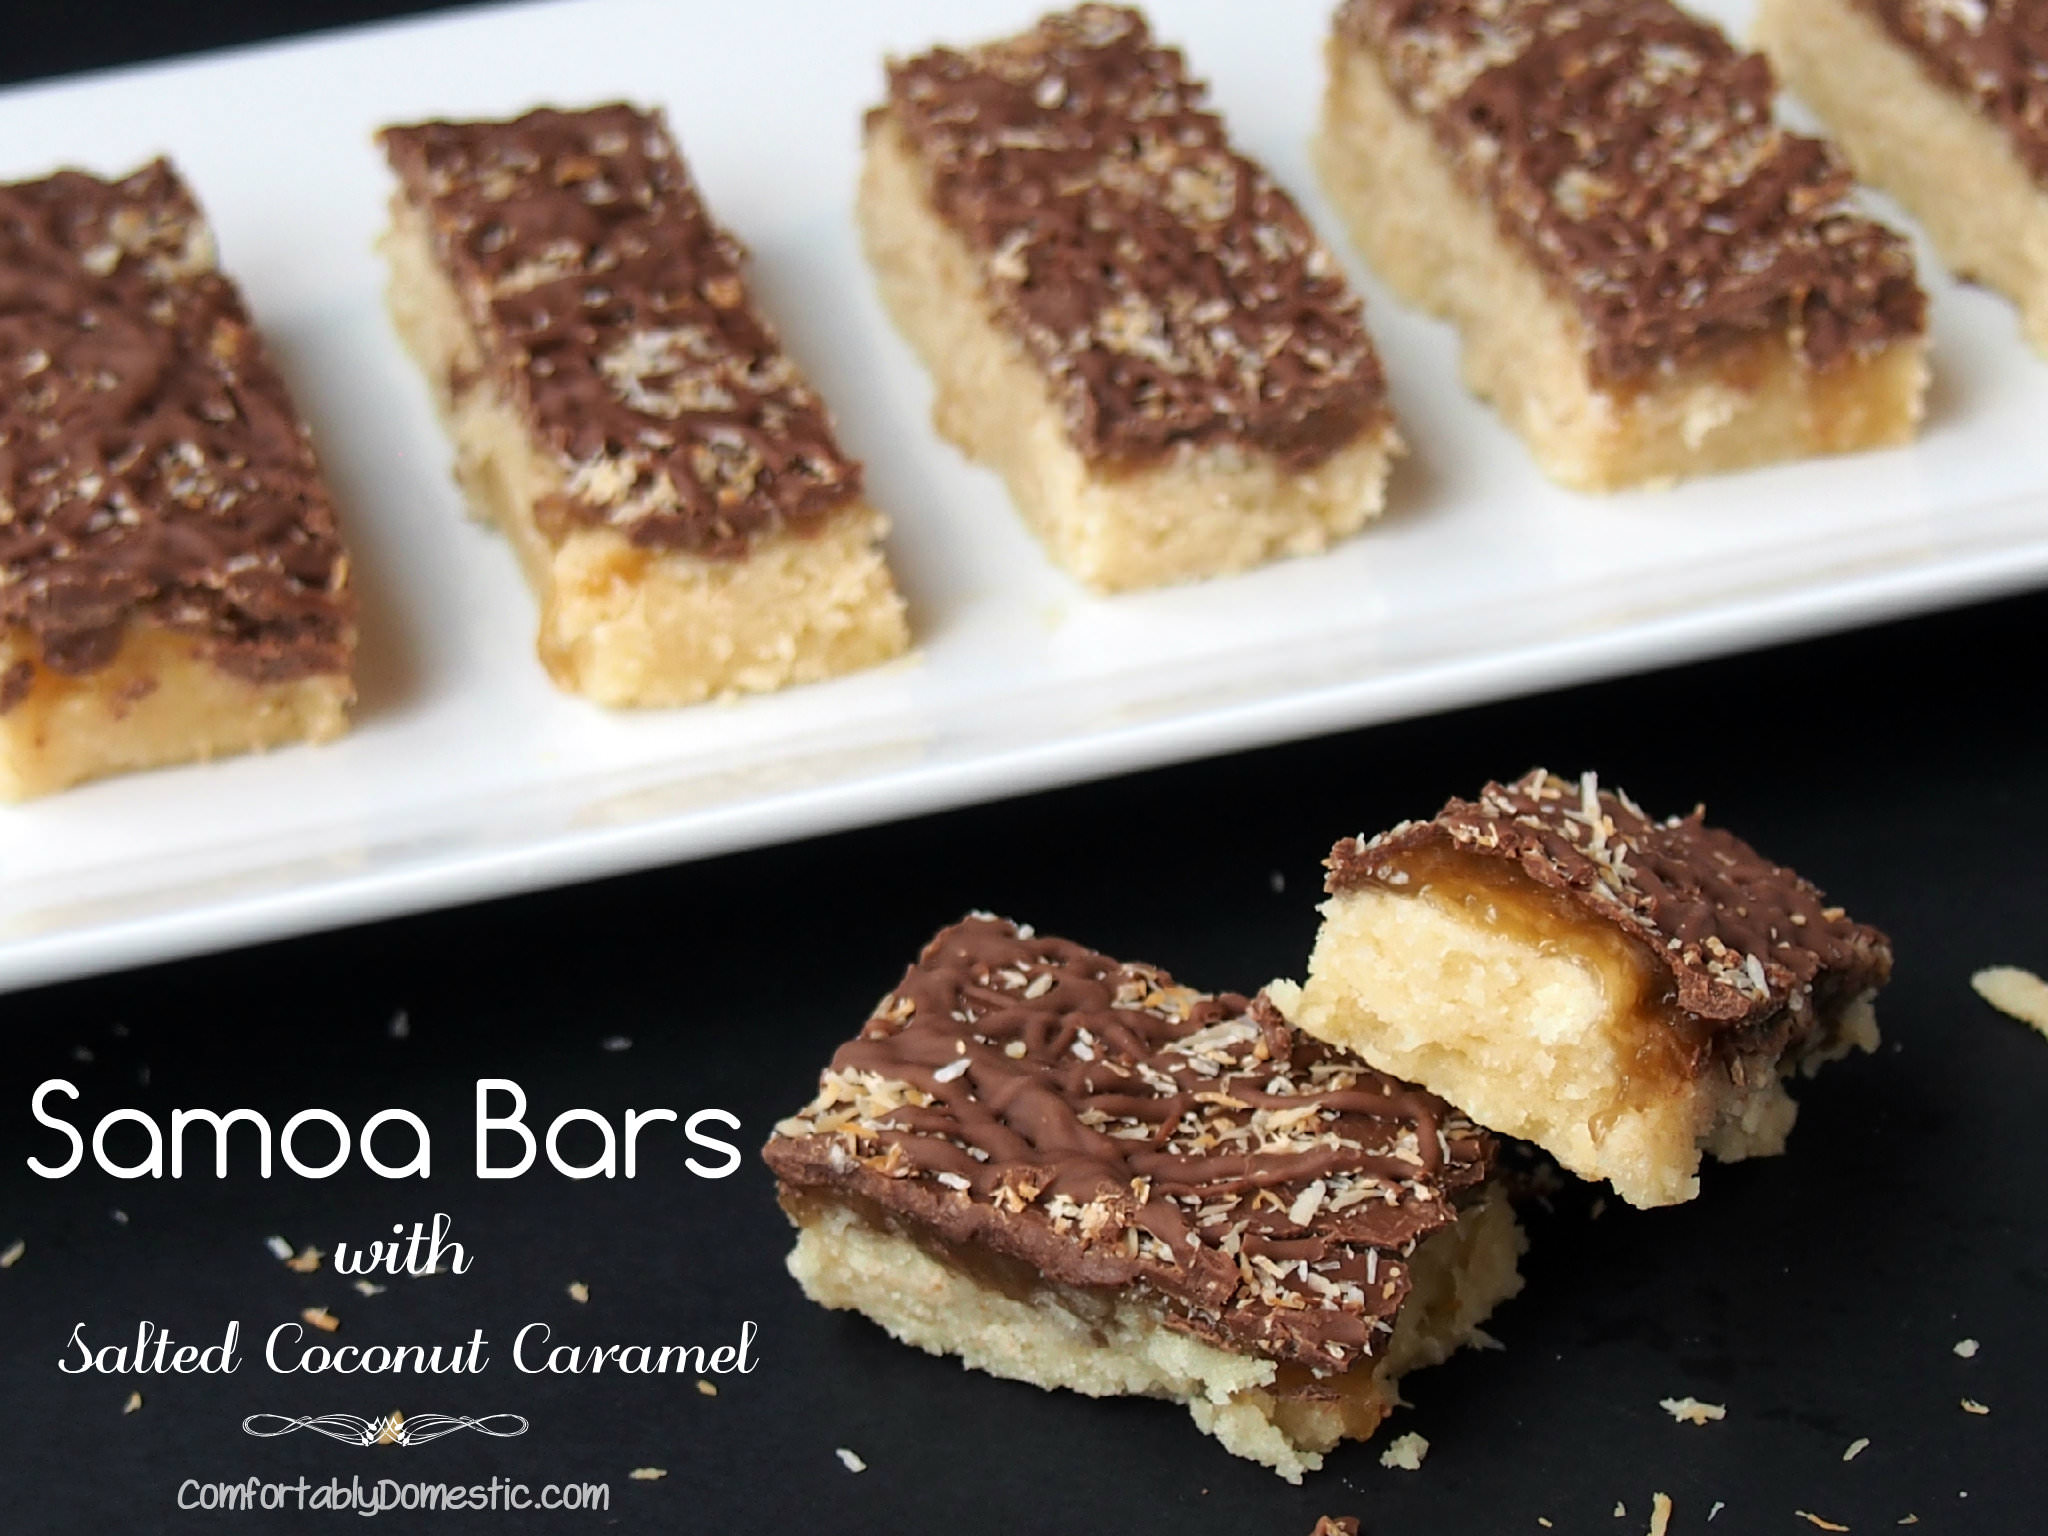 Samoa Bars are reminiscent of the popular Girl Scout Cookie. Crisp, buttery shortbread, smothered with a thin layer of dreamy salted coconut caramel, then topped with rich dark chocolate and toasted coconut. | ComfortablyDomestic.com